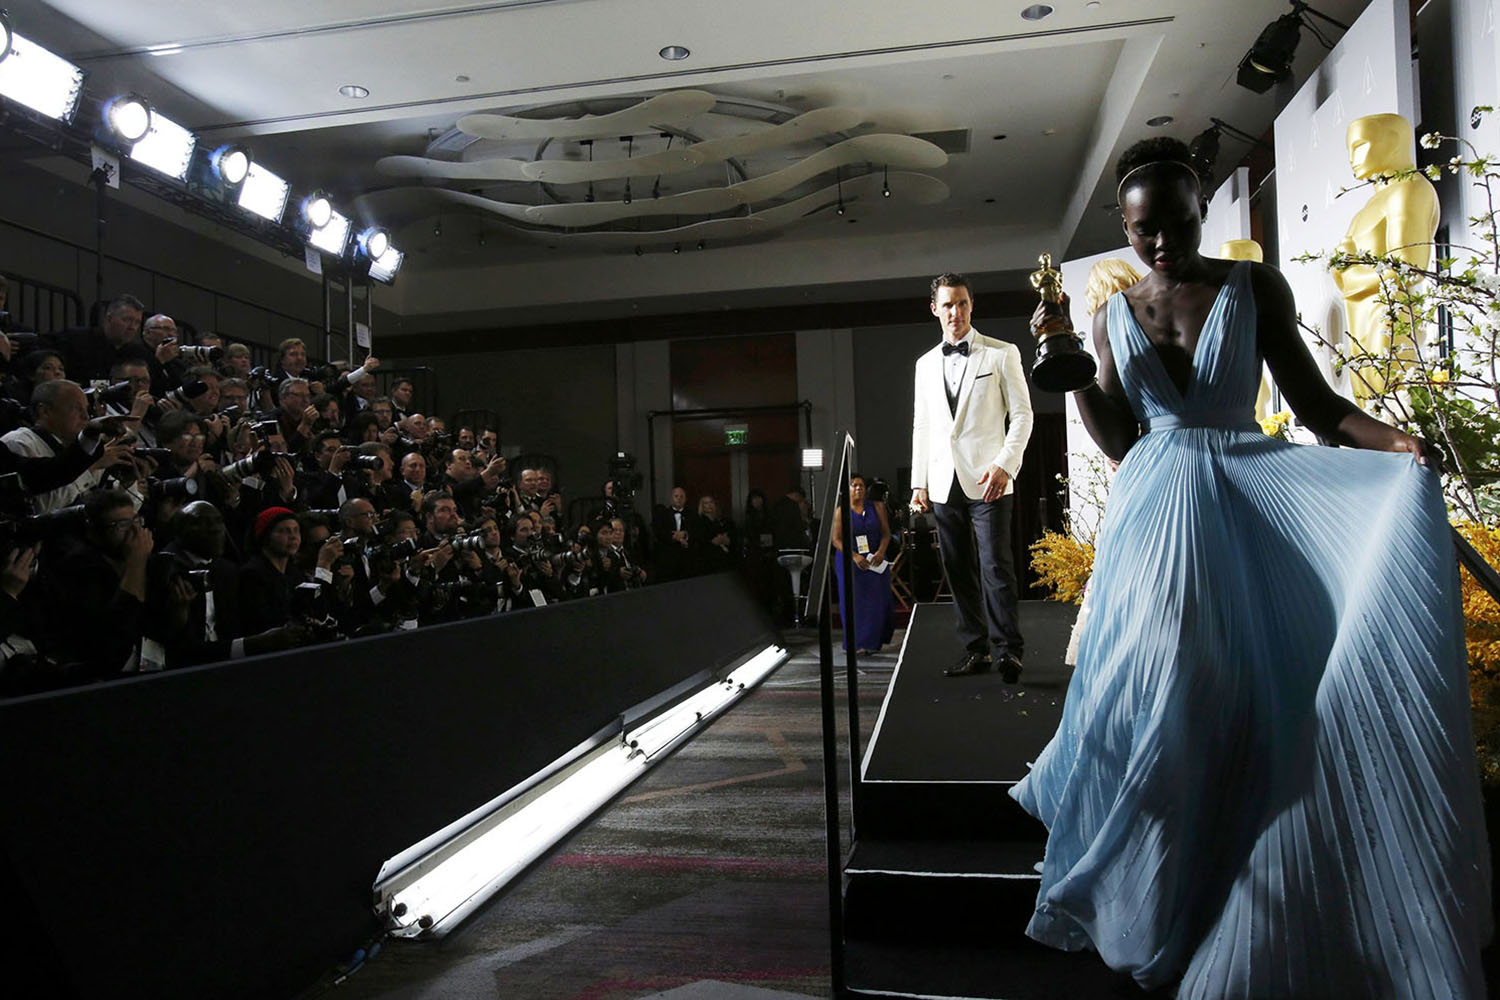 Mar. 2, 2014. Lupita Nyong'o and Matthew McConaughey walk offstage after posing with their awards for best supporting actress for  12 Years a Slave  and best actor for his role in  Dallas Buyers Club  at the 86th Academy Awards in Hollywood, California.